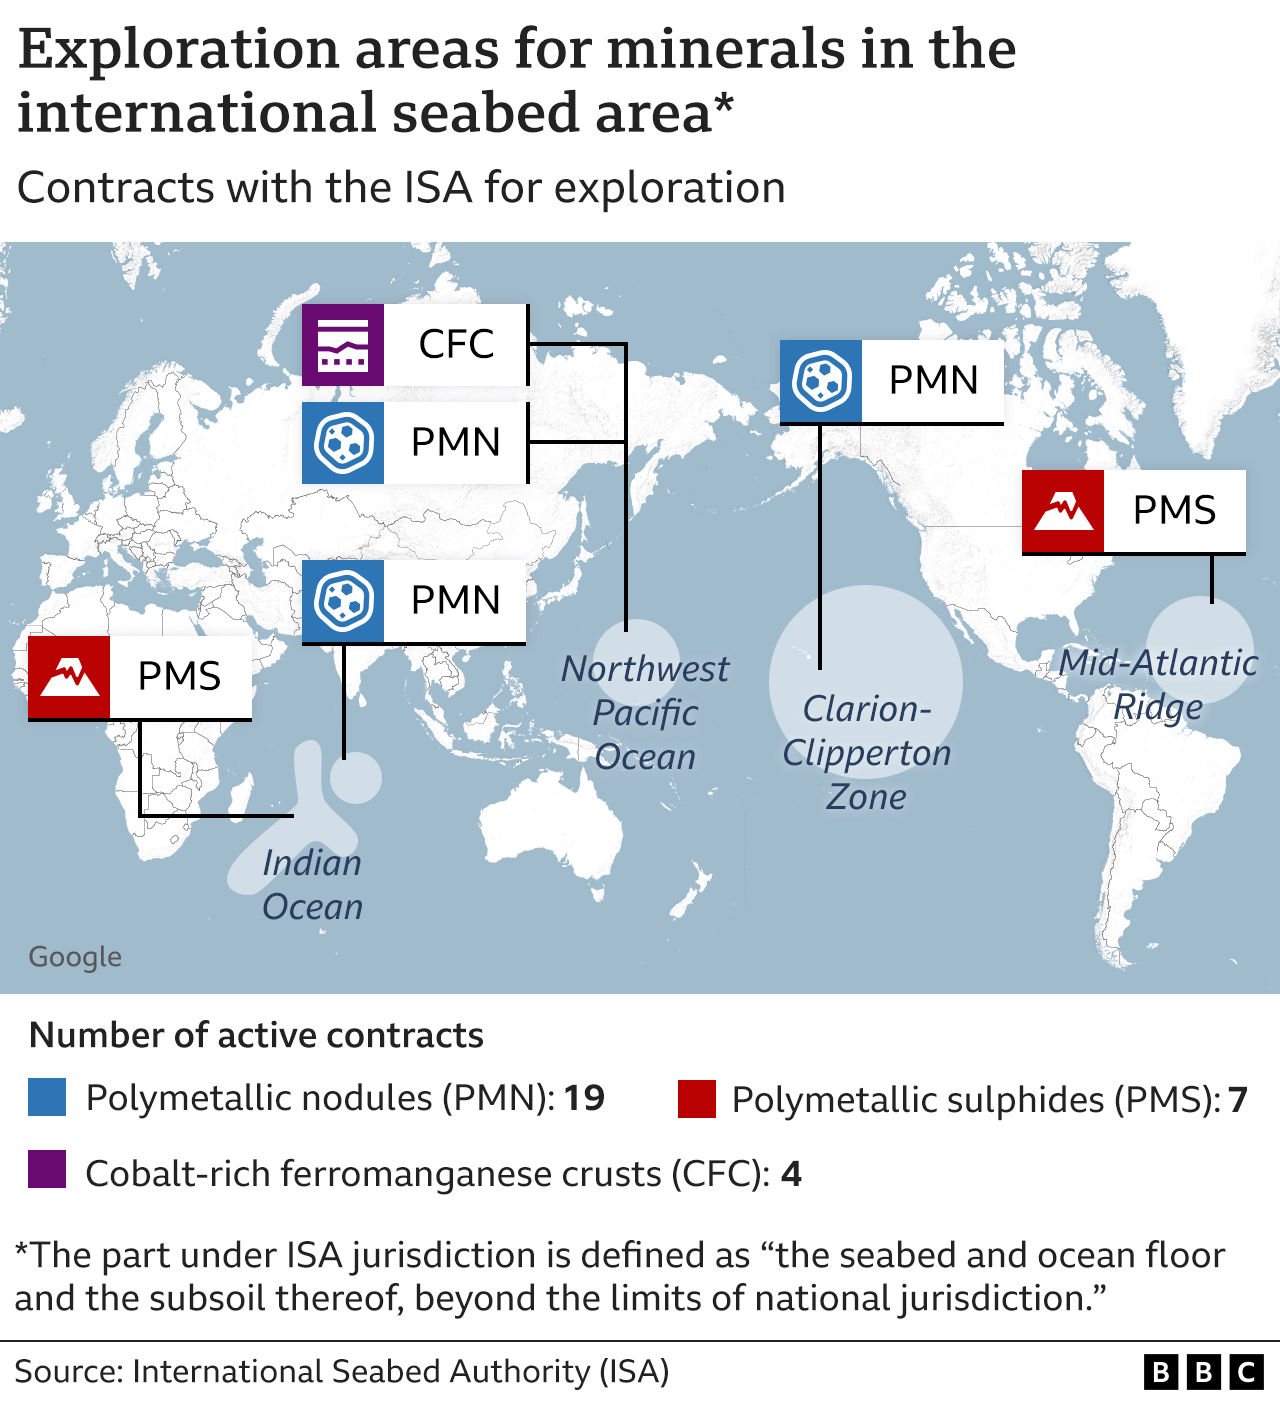 The UN-affiliated International Seabed Authority (ISA) has issued 31 exploration licences so far, of which 30 are active.